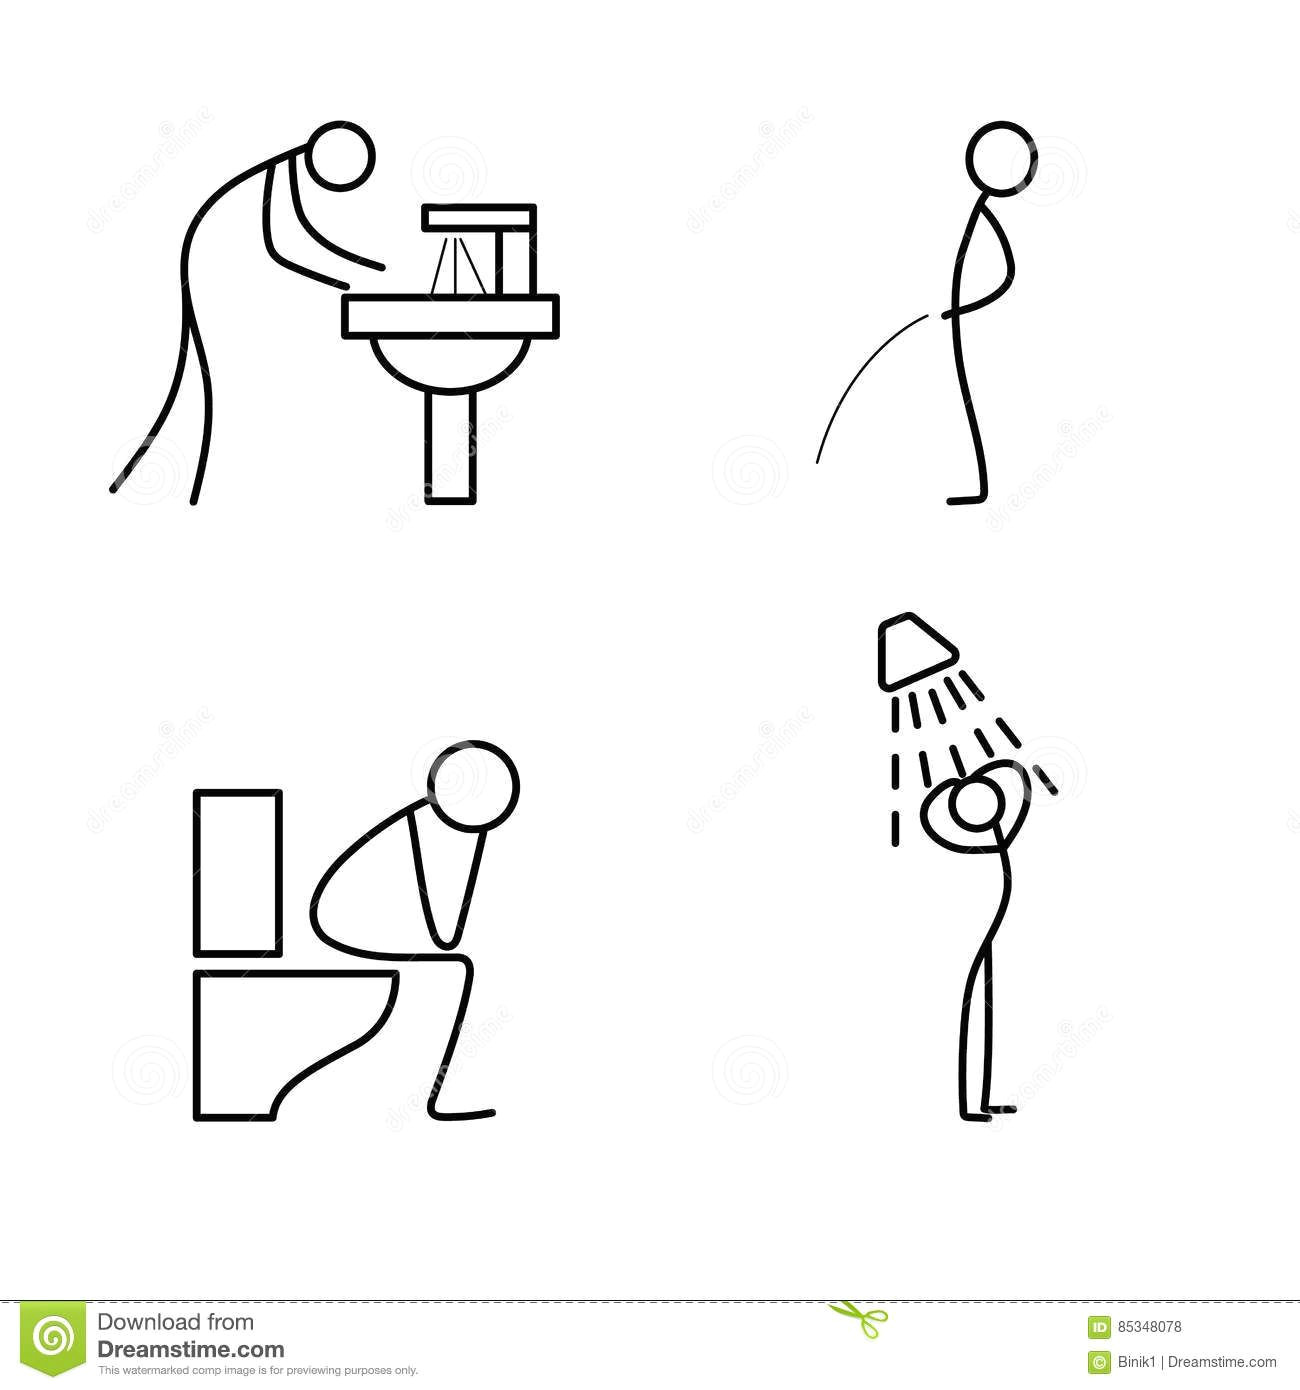 cartoon icon of sketch stick figure doing life routine download from over 56 million high quality stock photos images vectors sign up for free today